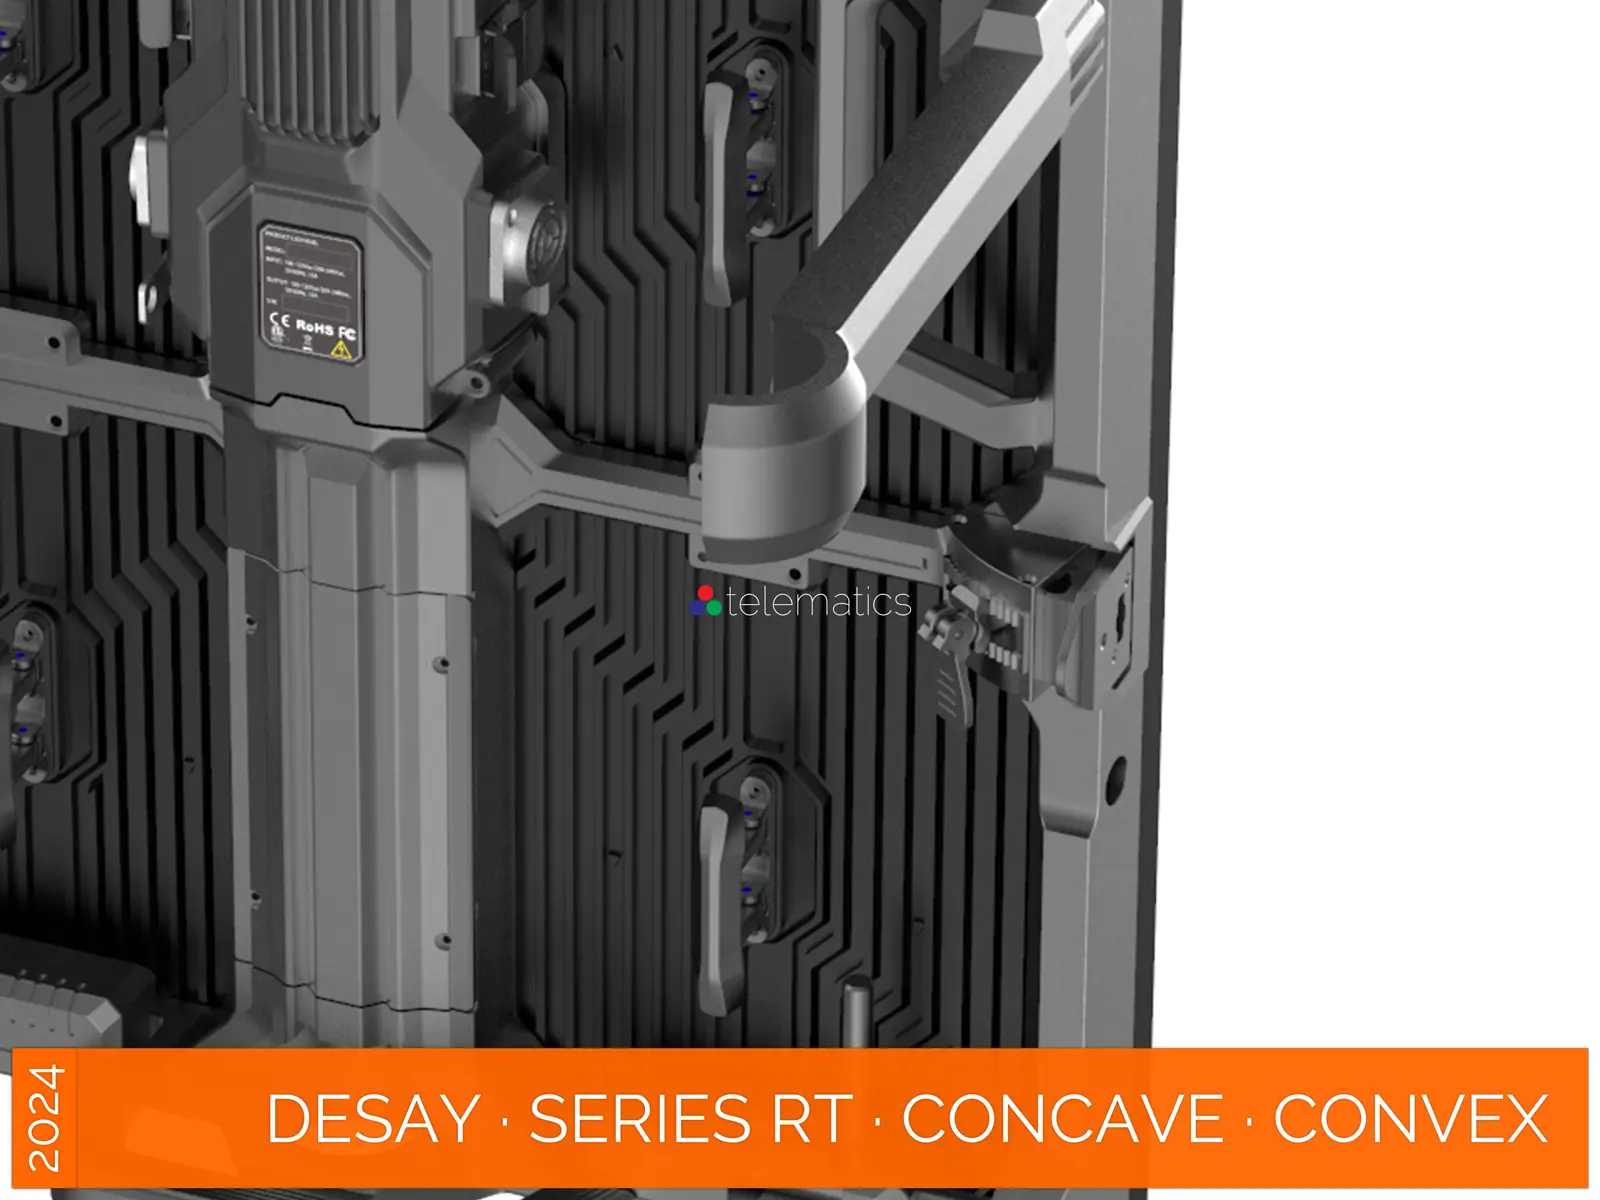 Desay · Series RT · Direct View LED Display Panel · Full Pixel Range · Rental Or Touring · Outdoor Rated · Rapid Service And Setup · Concave And Convex On Demand · NovaStar COEX MX CX · Vision Management Platform · Viplex · review · price · cost · priced from $1,790 per square meter